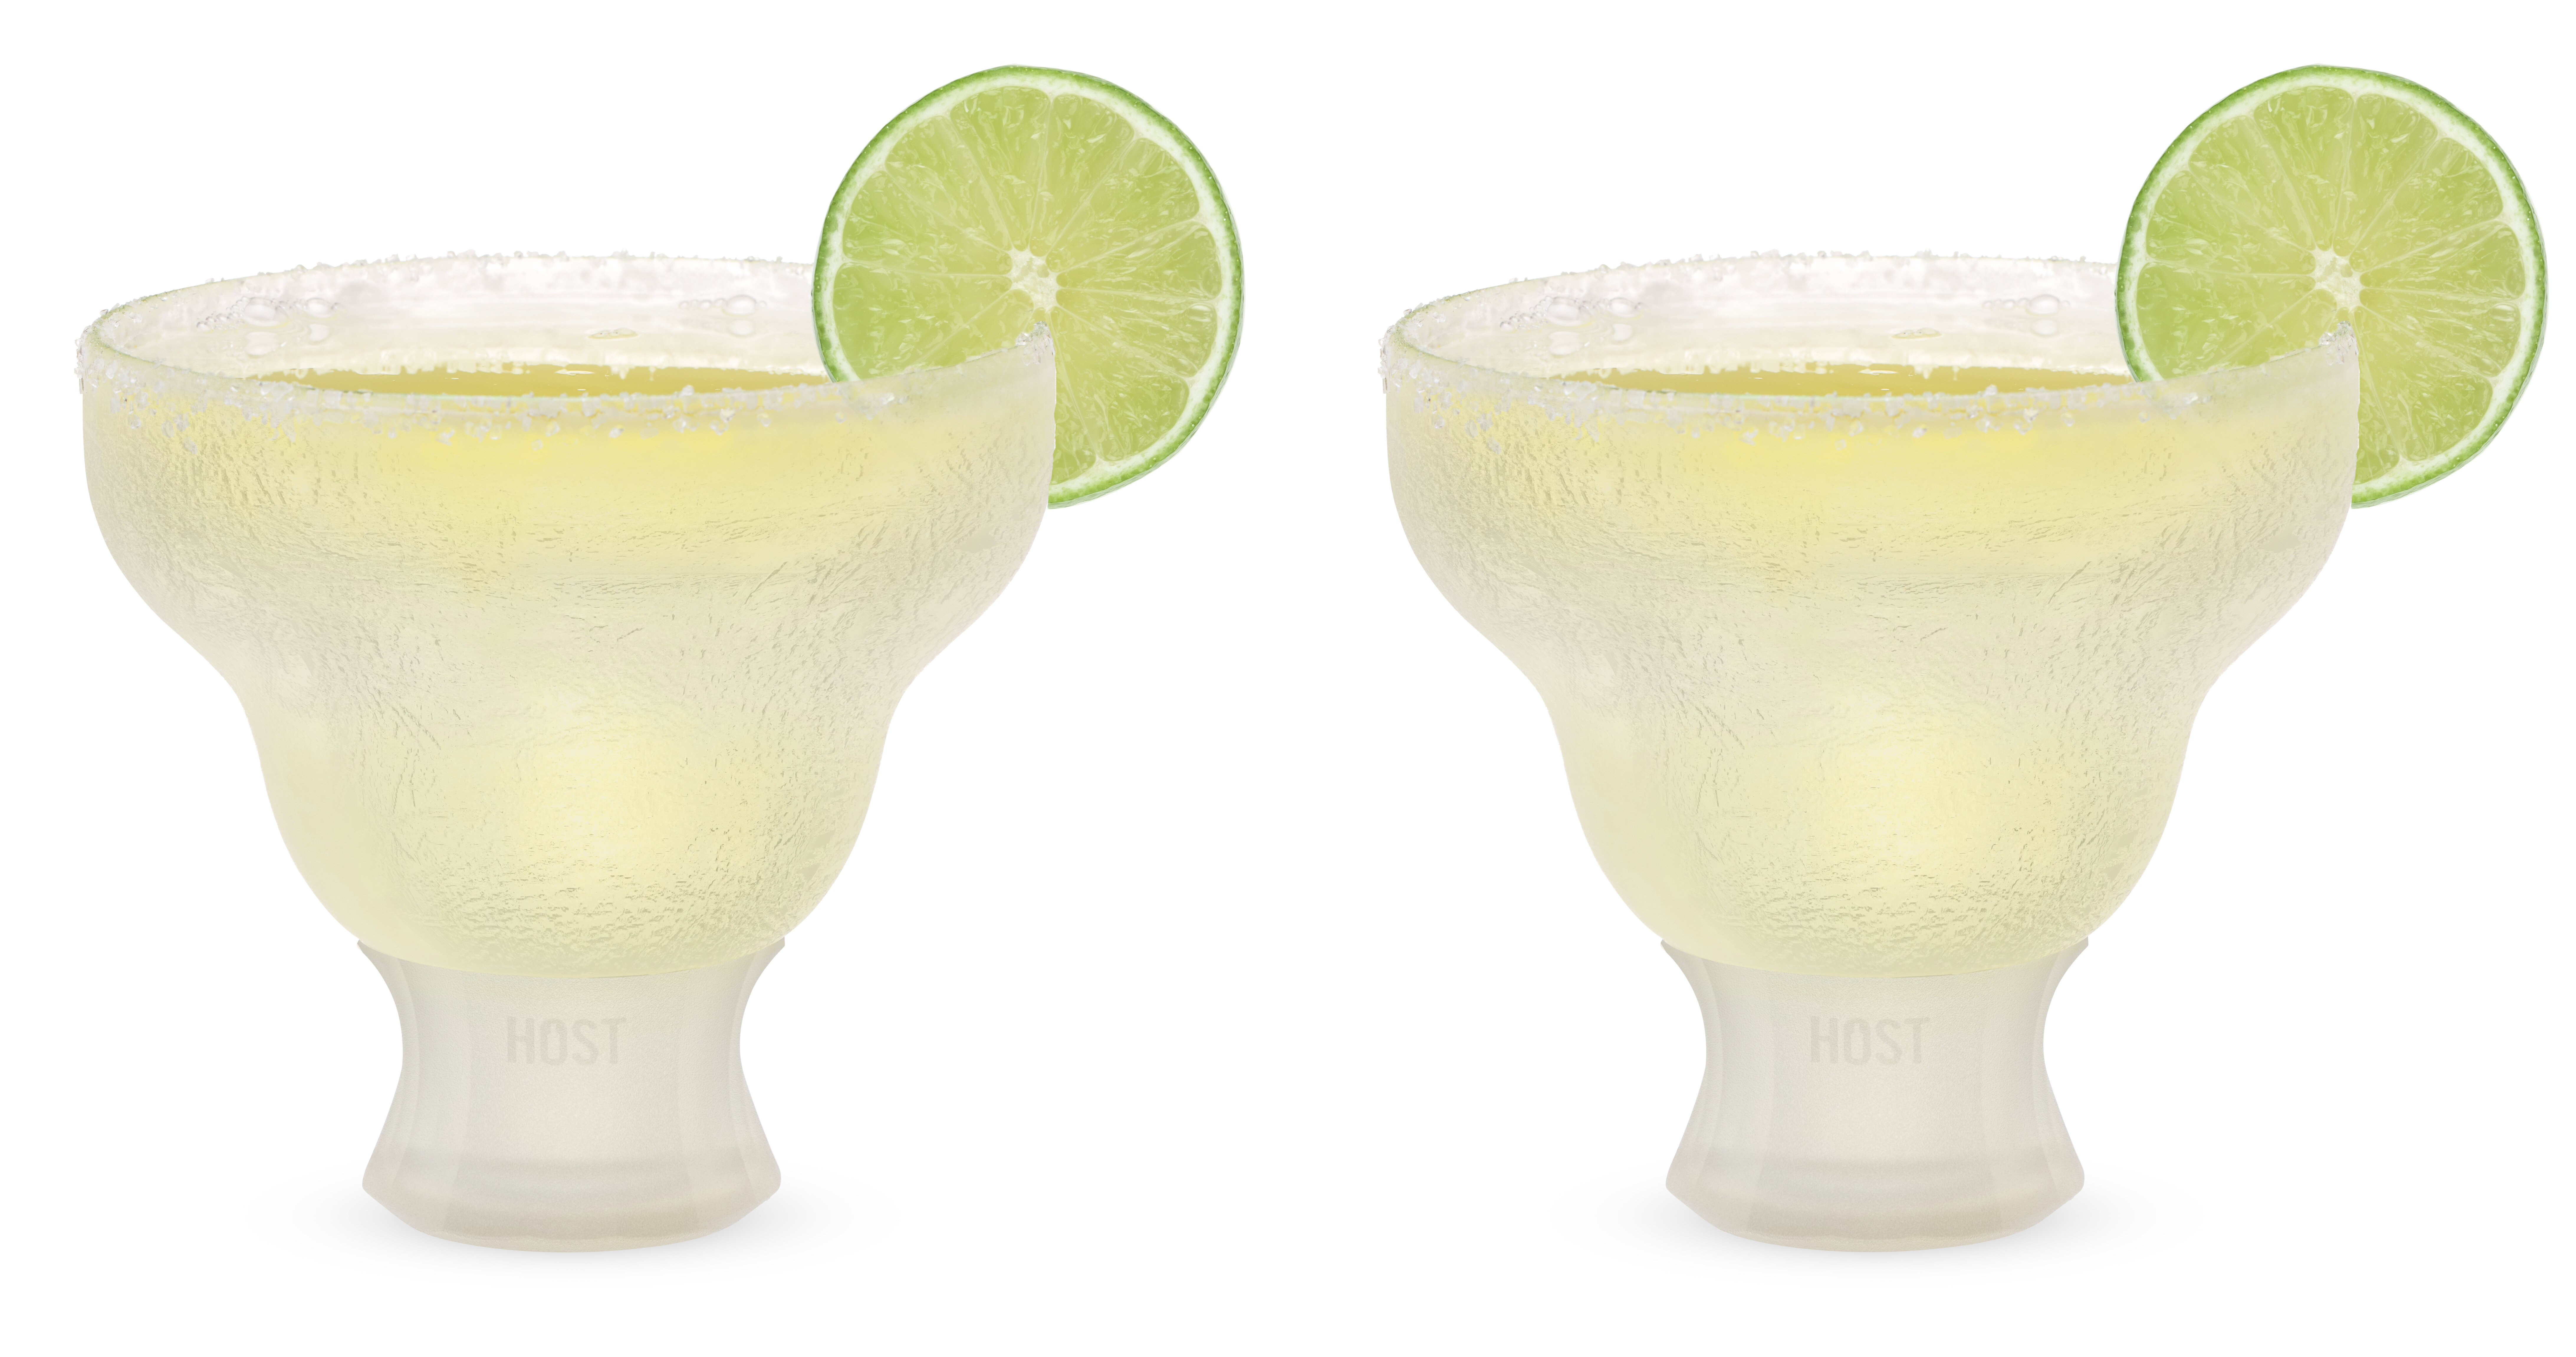 Host Stemless Margarita Glasses, Insulated Cocktail glass, Double Walled Cocktail  Glasses, Frozen Cups to Keep Your Drinks Cold, Set of 2